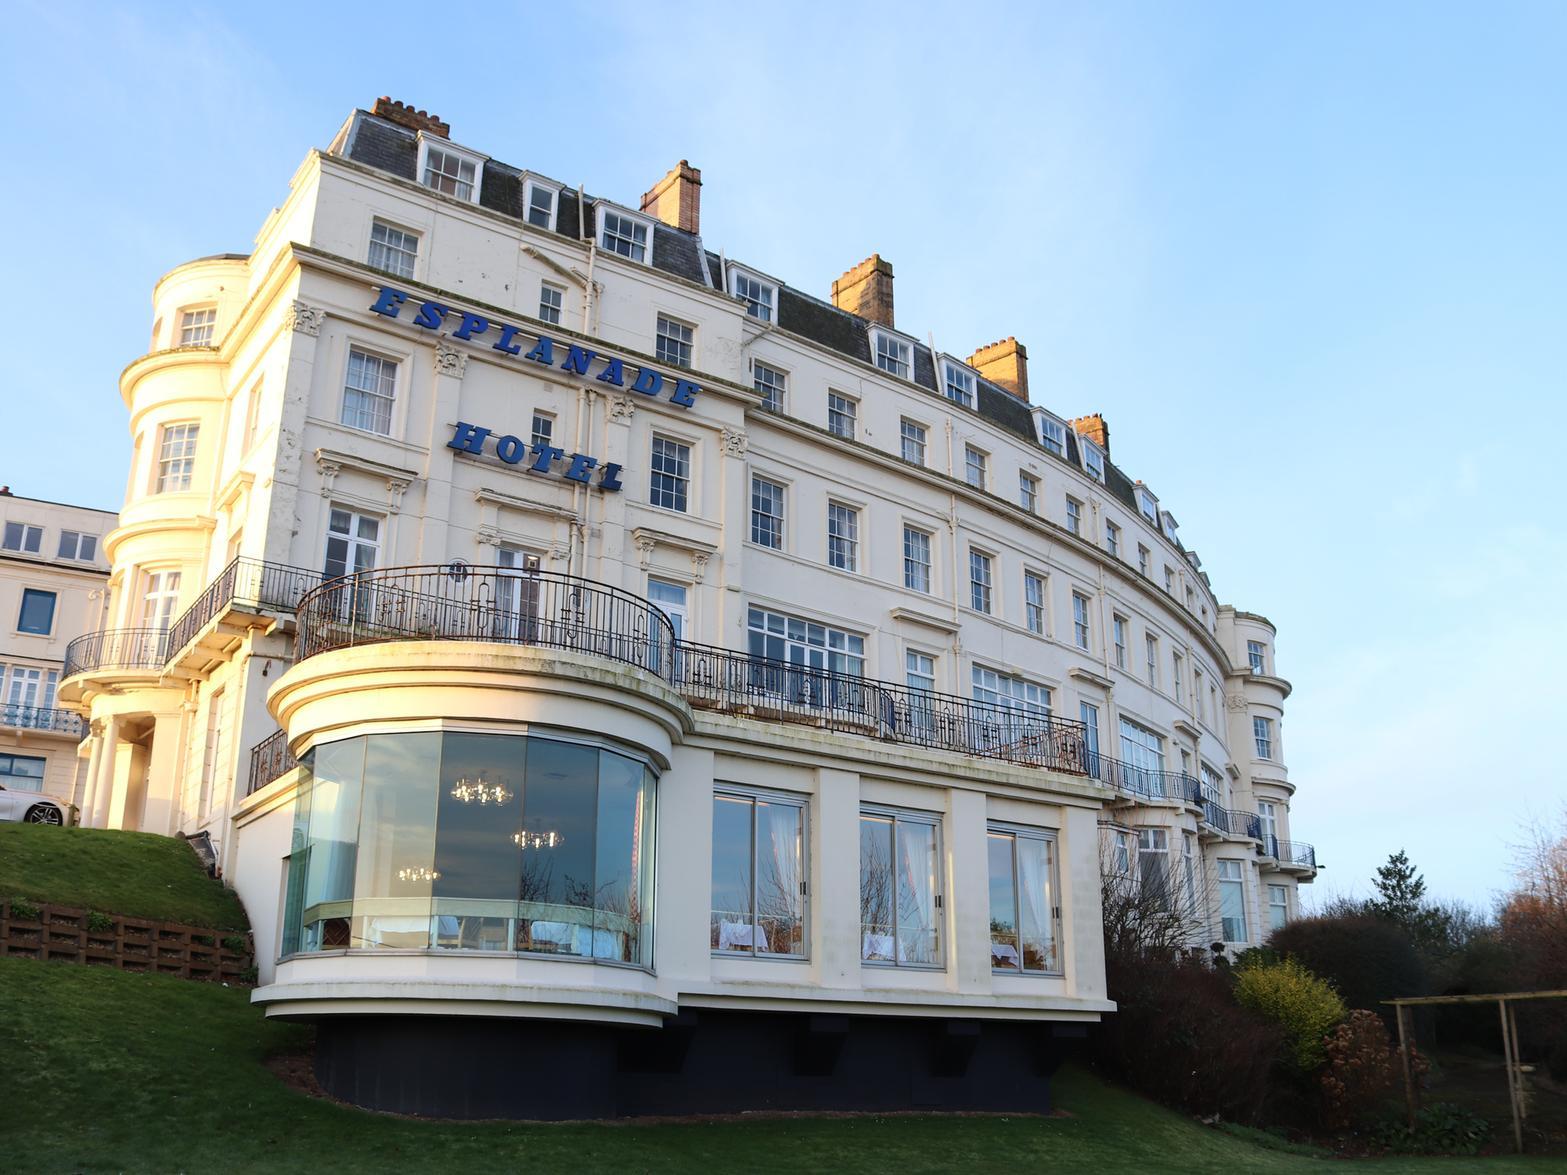 Scarborough's Esplanade Hotel bought by holiday firm | The Scarborough News